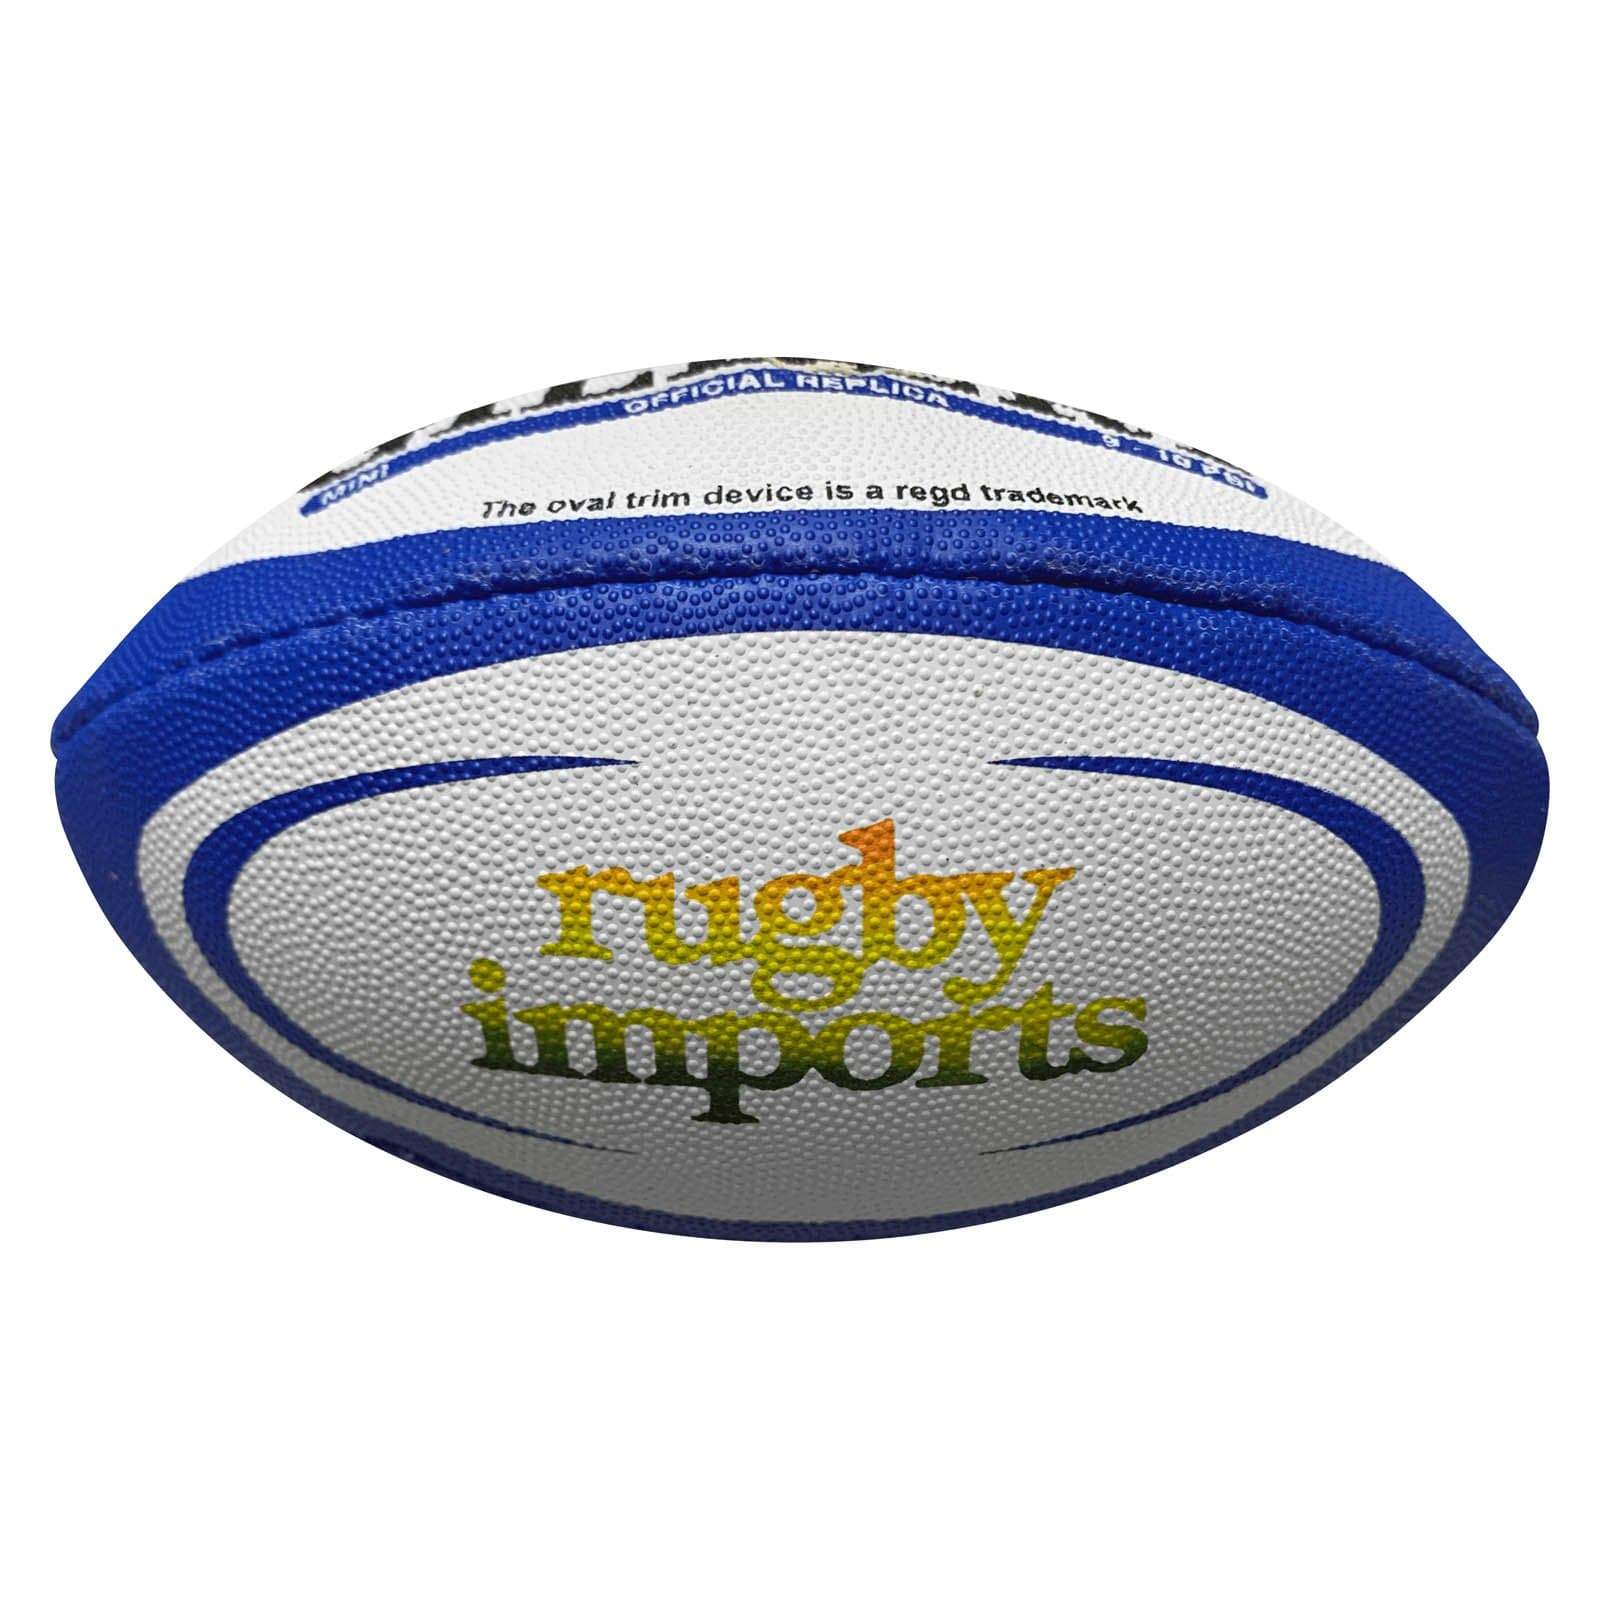 Rugby Imports Gilbert Rugby Imports Mini Rugby Ball